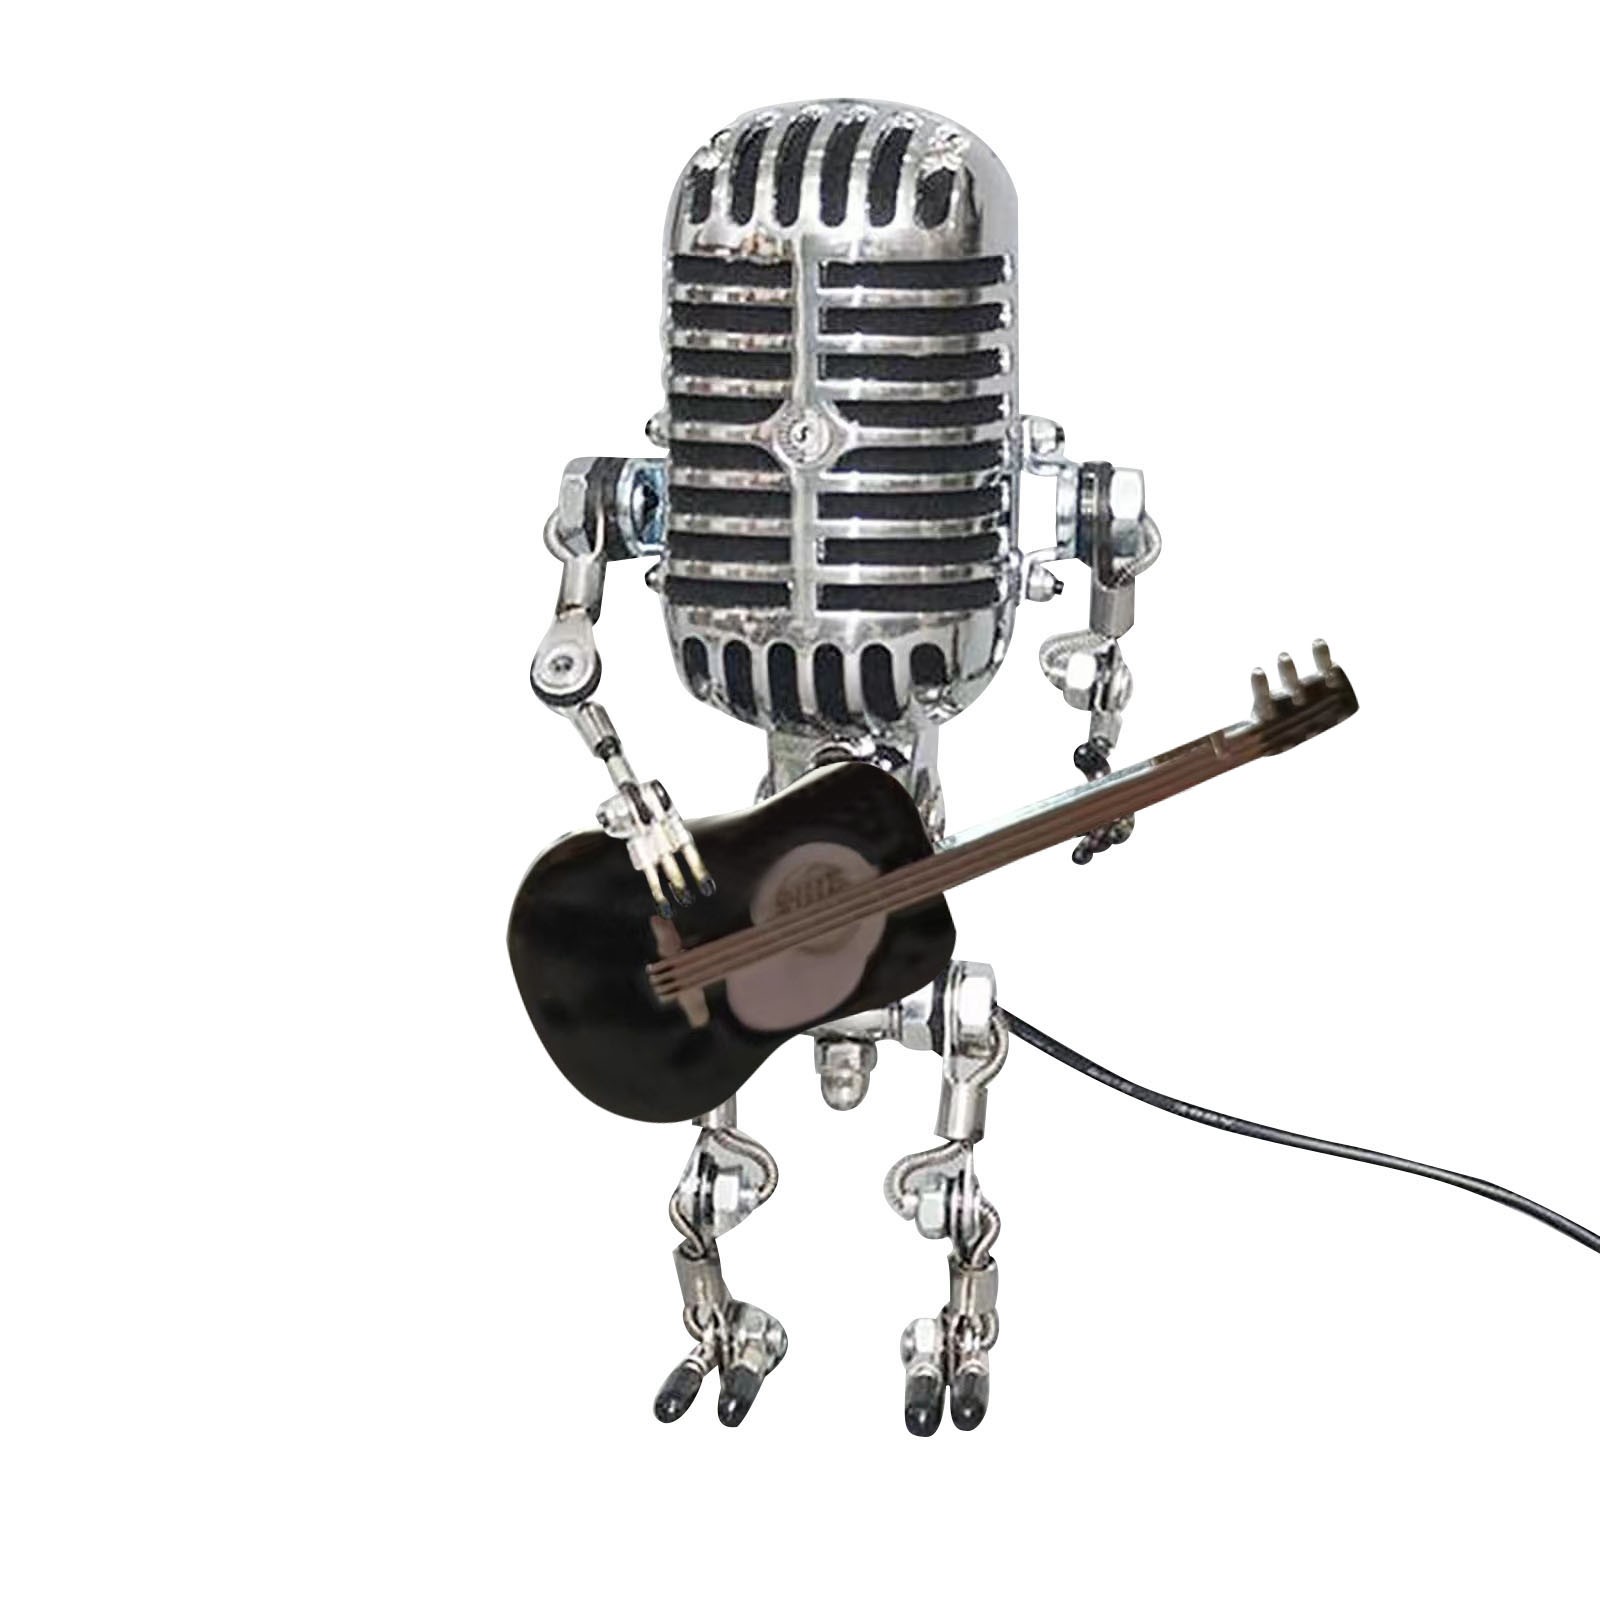 SDJMa Desk Lamp,Handmade Vintage Microphone Guitar Robot Table Lamp LED Bulbs Wall Lamp Home Desktop Decoration - Height 8.5 inch,Width 4 inch and Depth 3 inch - image 2 of 8